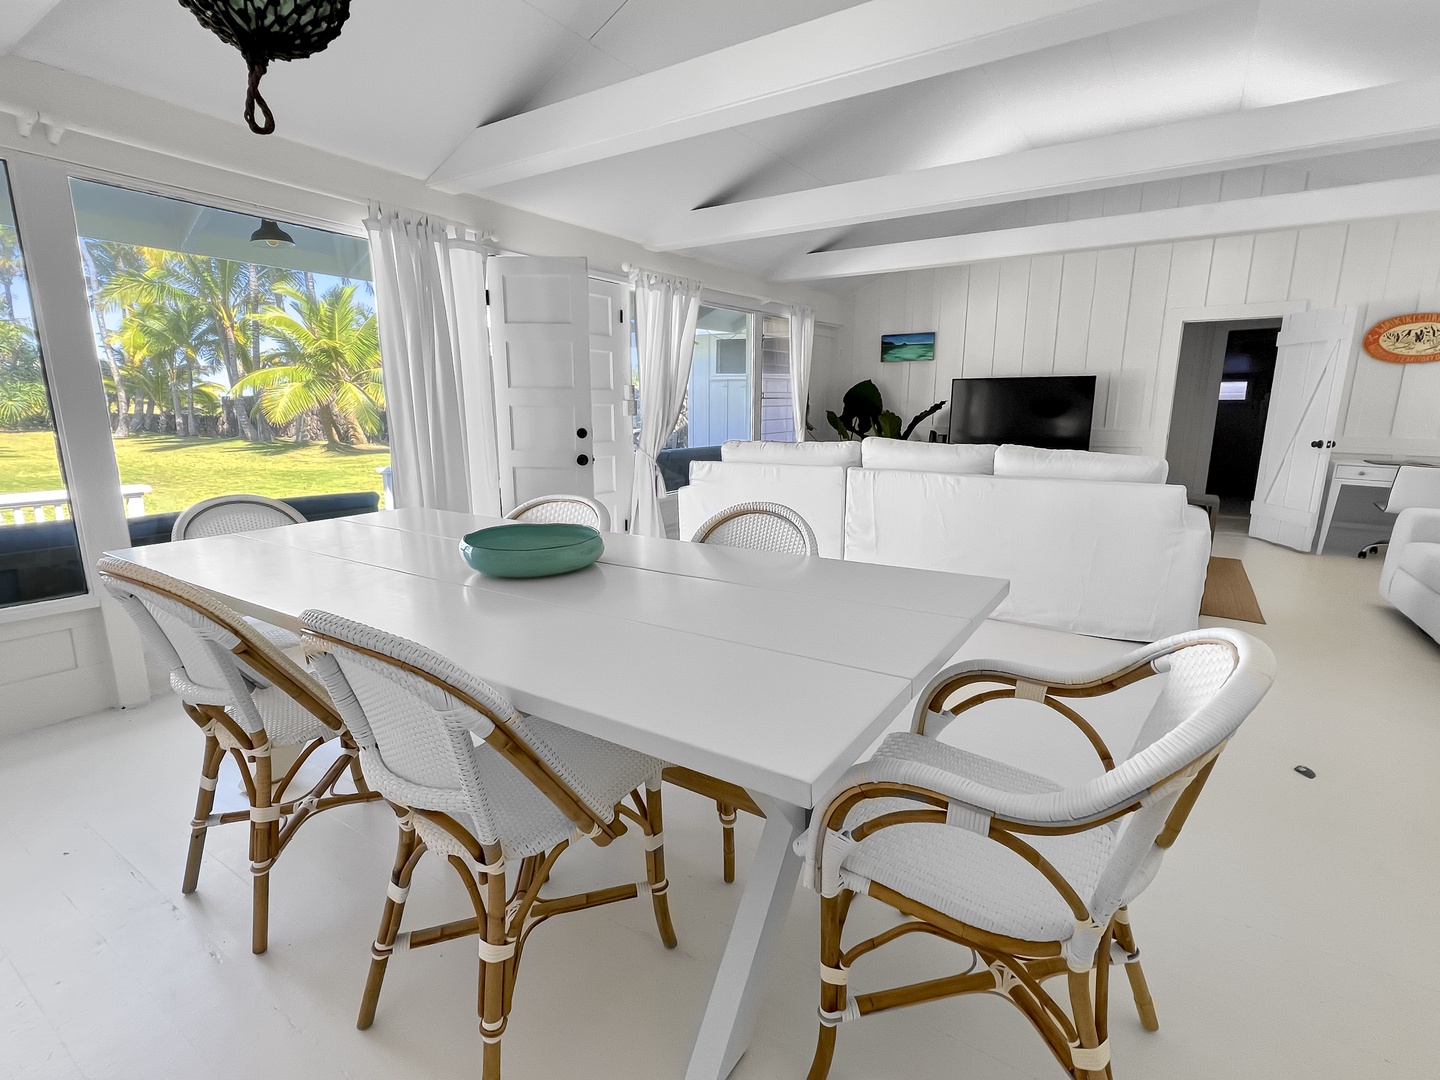 Kailua Vacation Rentals, Kai Mele - Table can seat six guests